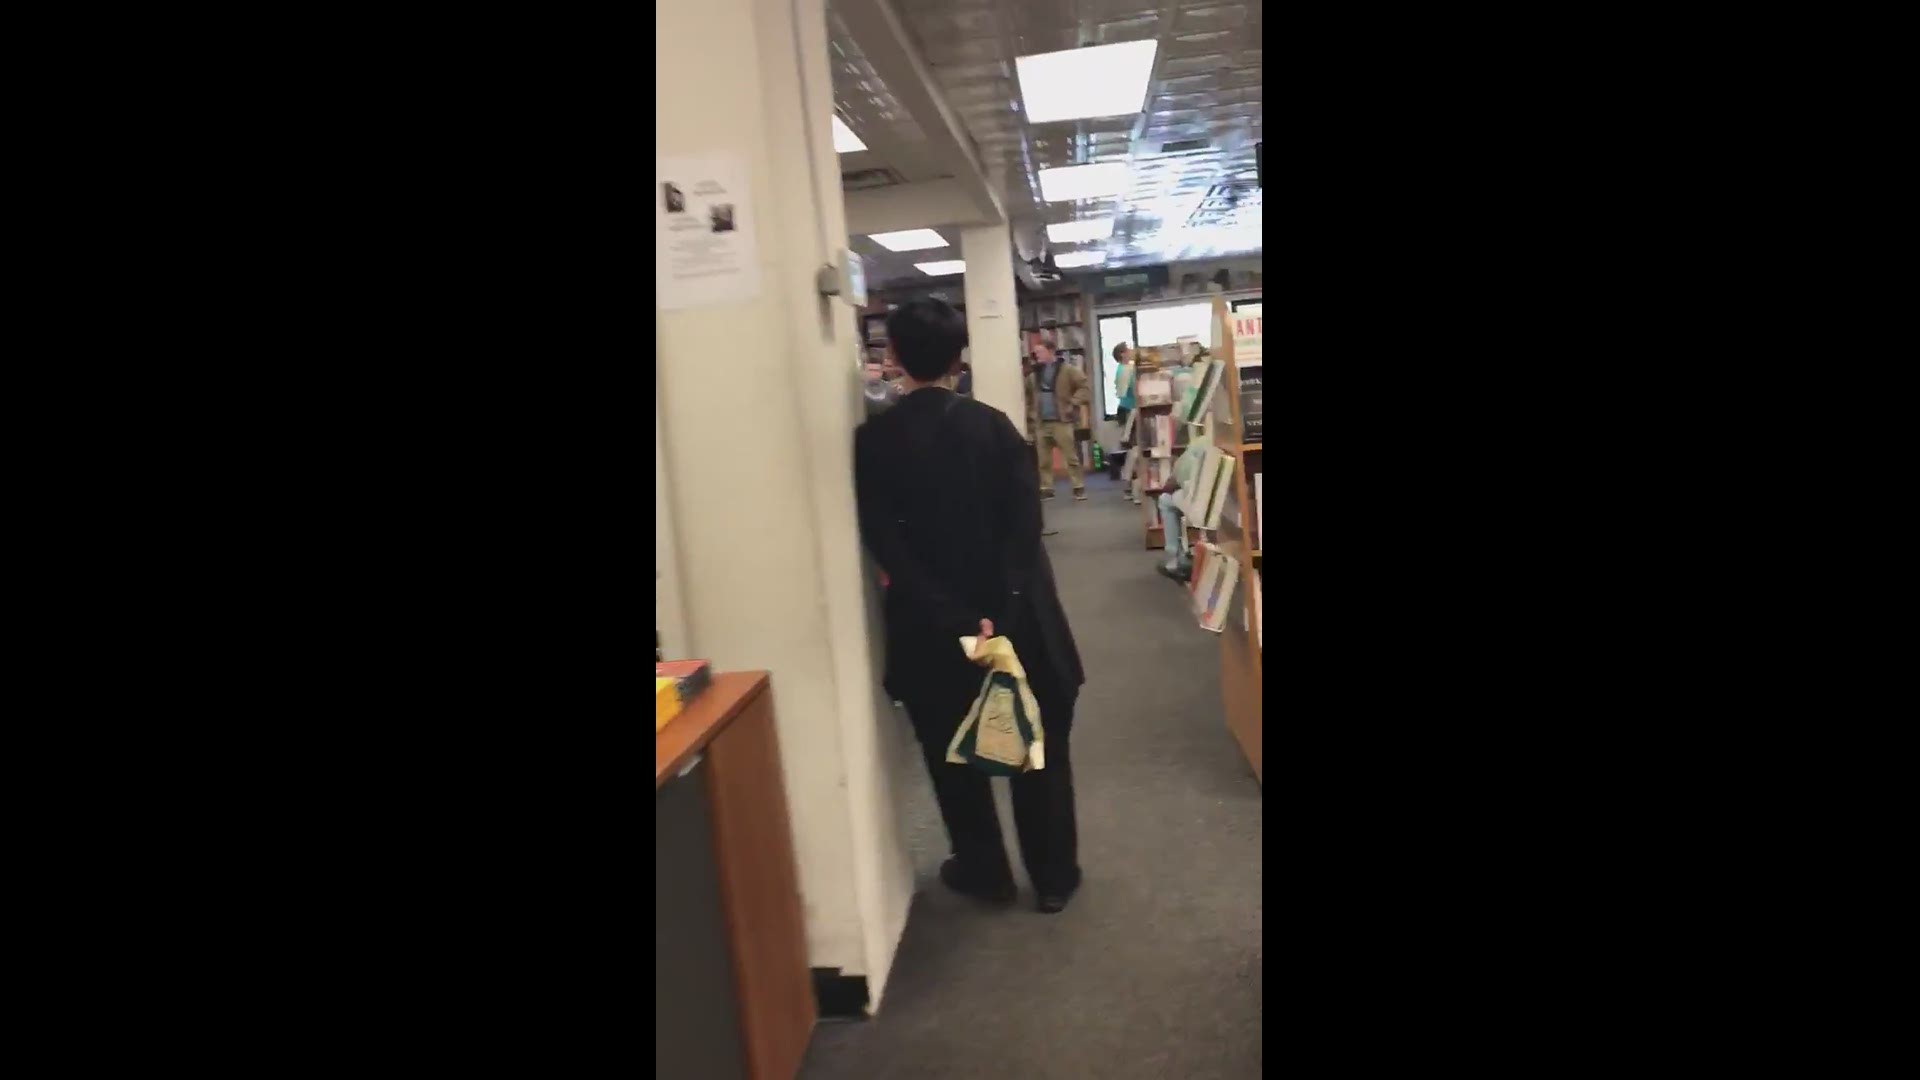 A group of nearly a dozen protesters referred to as white nationalists caused a disruption Saturday at Politics and Prose, a well-known bookstore in Washington, D.C. Bystanders say the interruption happened during a discussion about Jonathan Metzl’s book called “Dying of Whiteness: How the Politics of Racial Resentment Is Killing America's Heartland.”